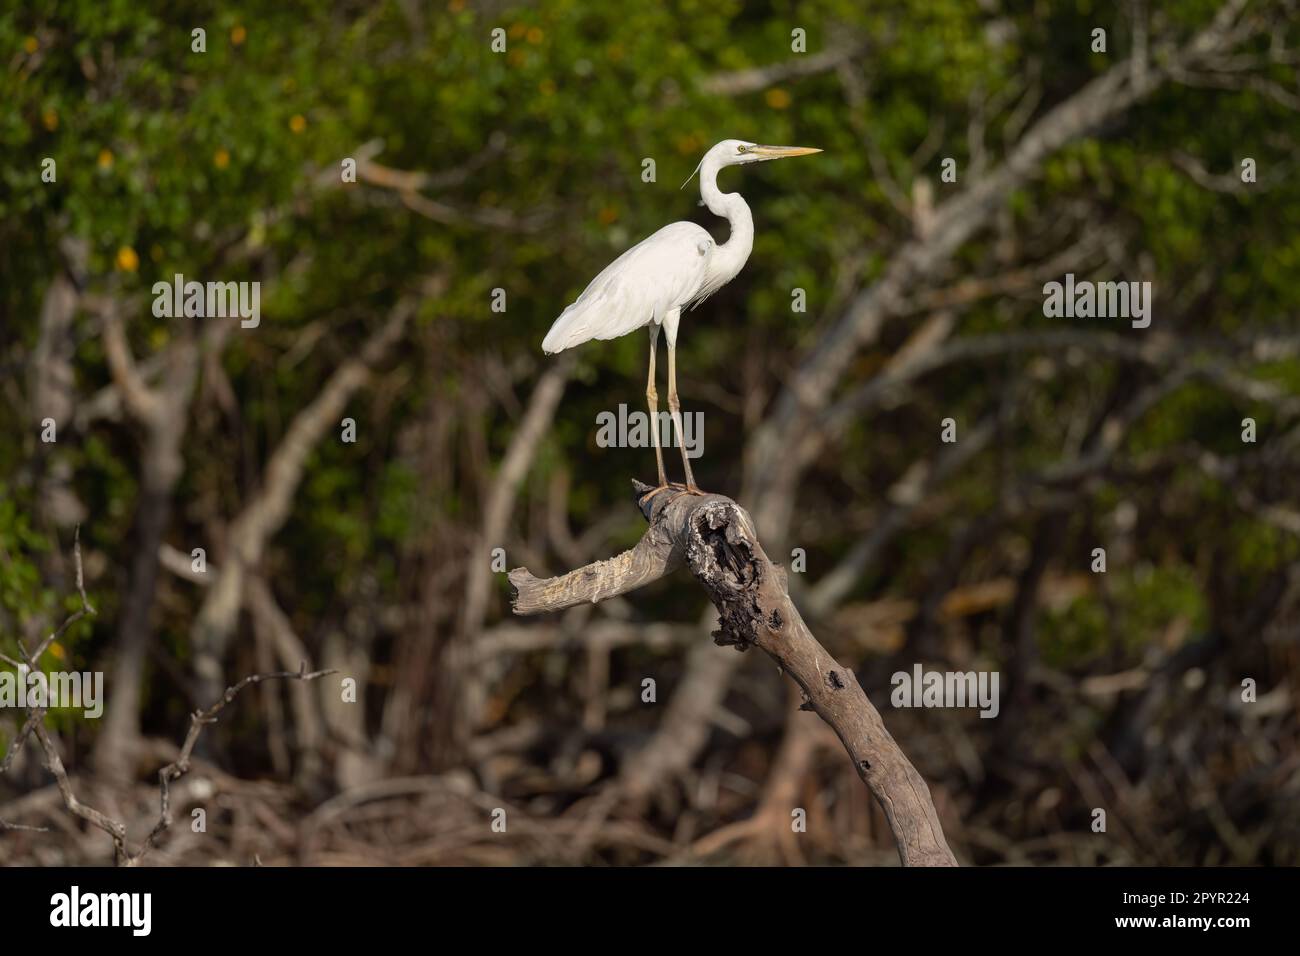 White Morph Great Blue Heron Perched, Florida Stock Photo